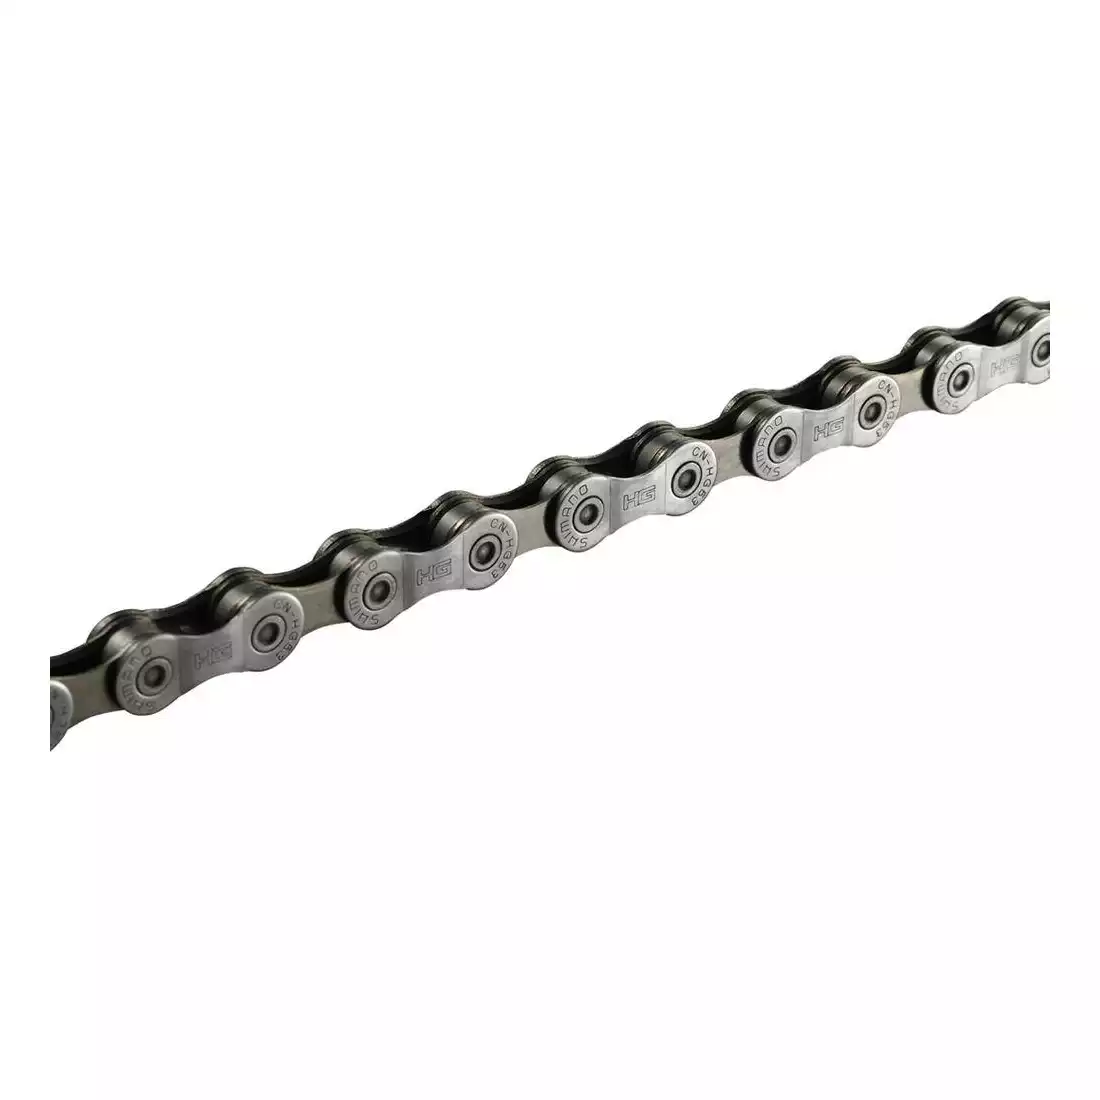 SHIMANO HG-53 bicycle chain 9 speed, 116 links, gray